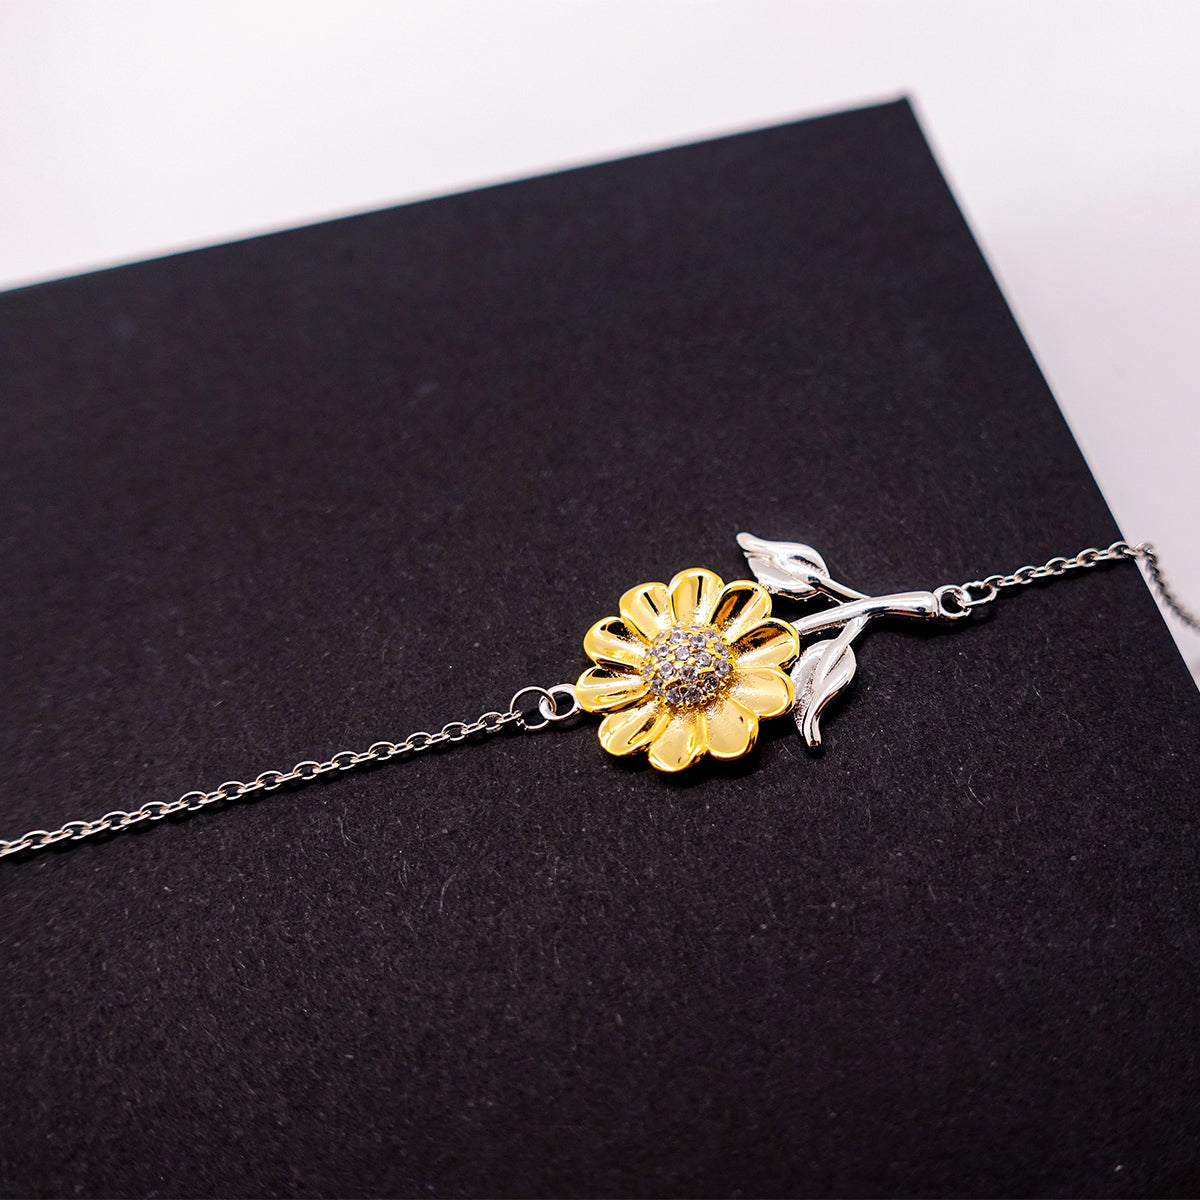 Heartwarming Sunflower Bracelet Retirement Coworkers Gifts for Postal Worker, Postal Worker May You be proud of the work you do, the person you are Gifts for Boss Men Women Friends